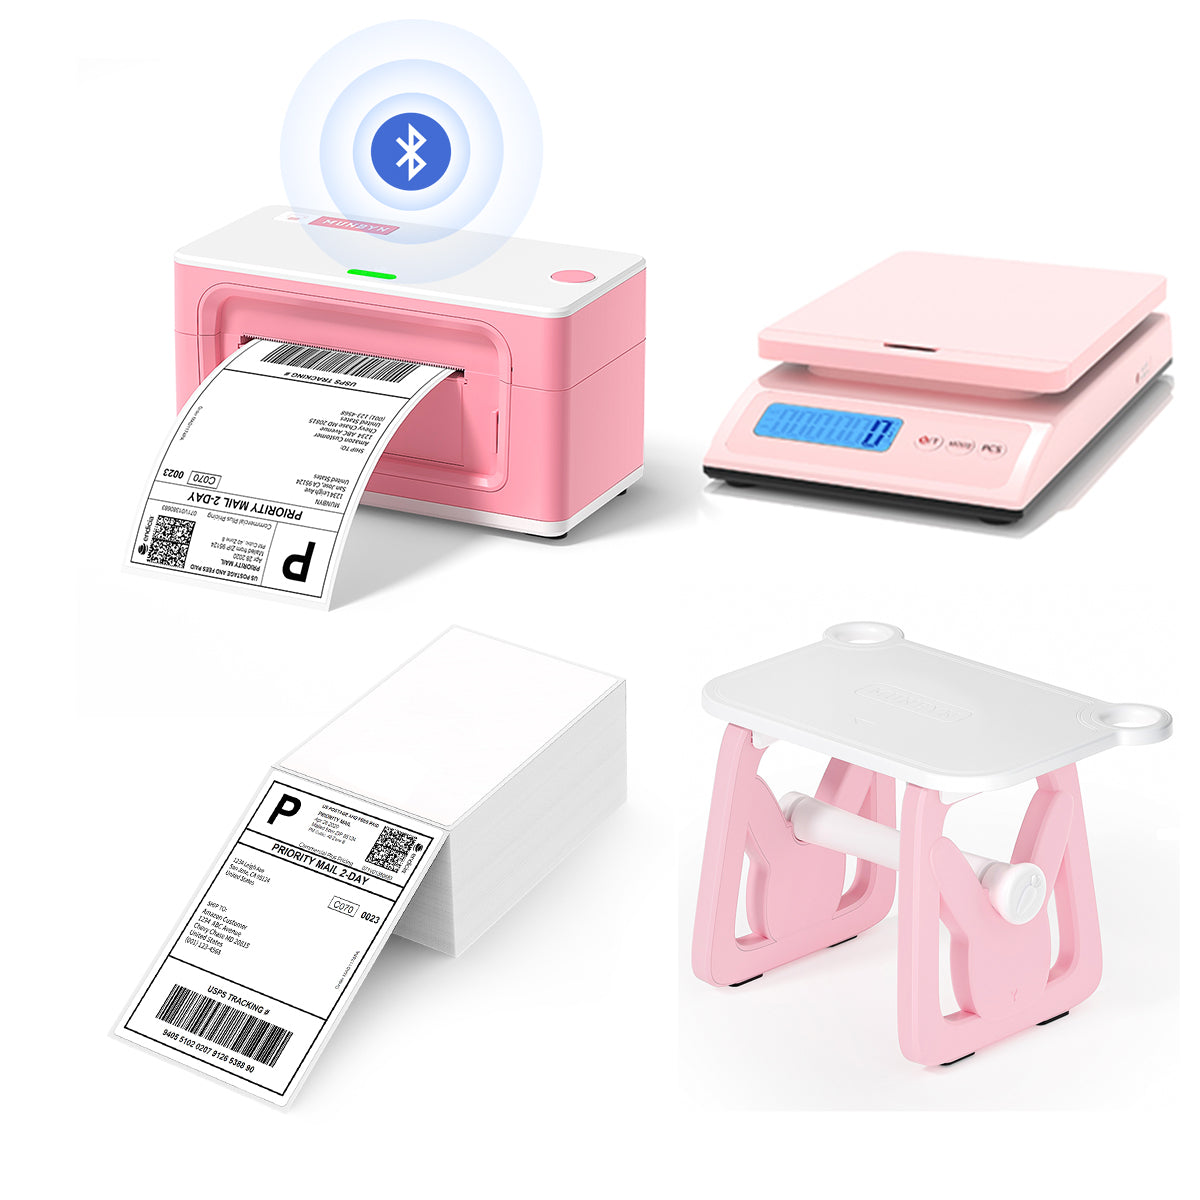 The bundle includes a Bluetooth thermal printer, a multifunctional MUNBYN pink label holder, a stack of shipping labels, and a postal scale.